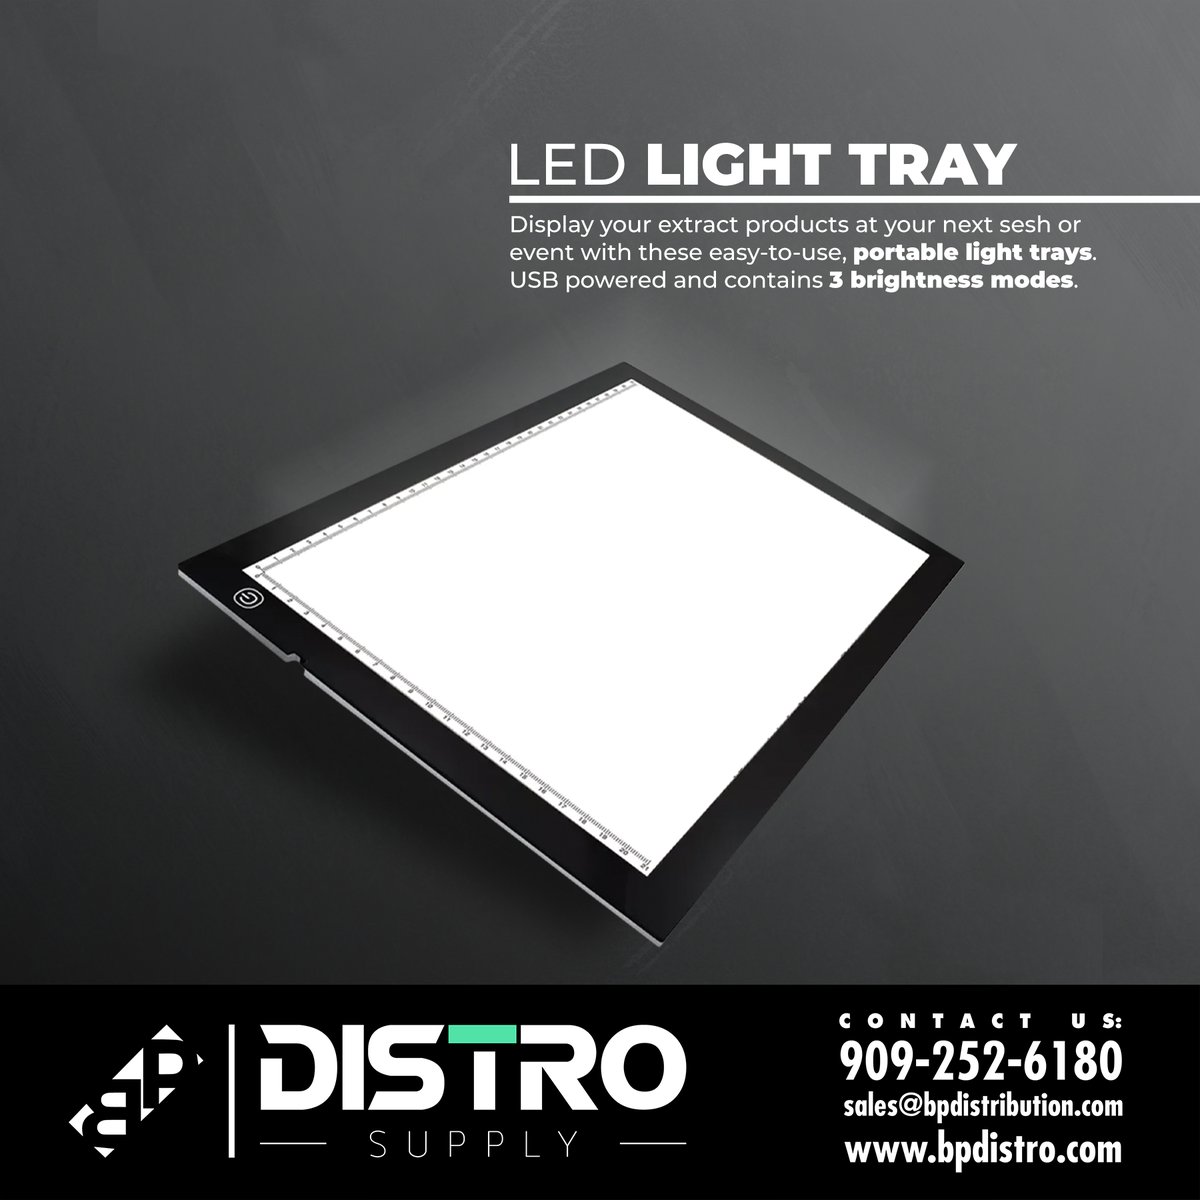 Display your favorite products with these useful and inexpensive LED light trays!  #cannabis #cannabiscommunity #cannabisculture #cannabiscup #cannabiscures #cannabissociety #cannabisoil #cannabis420 #cannabisdaily #cannabisindustry #CannabisPhotography #cannabisheals #cannabiseu